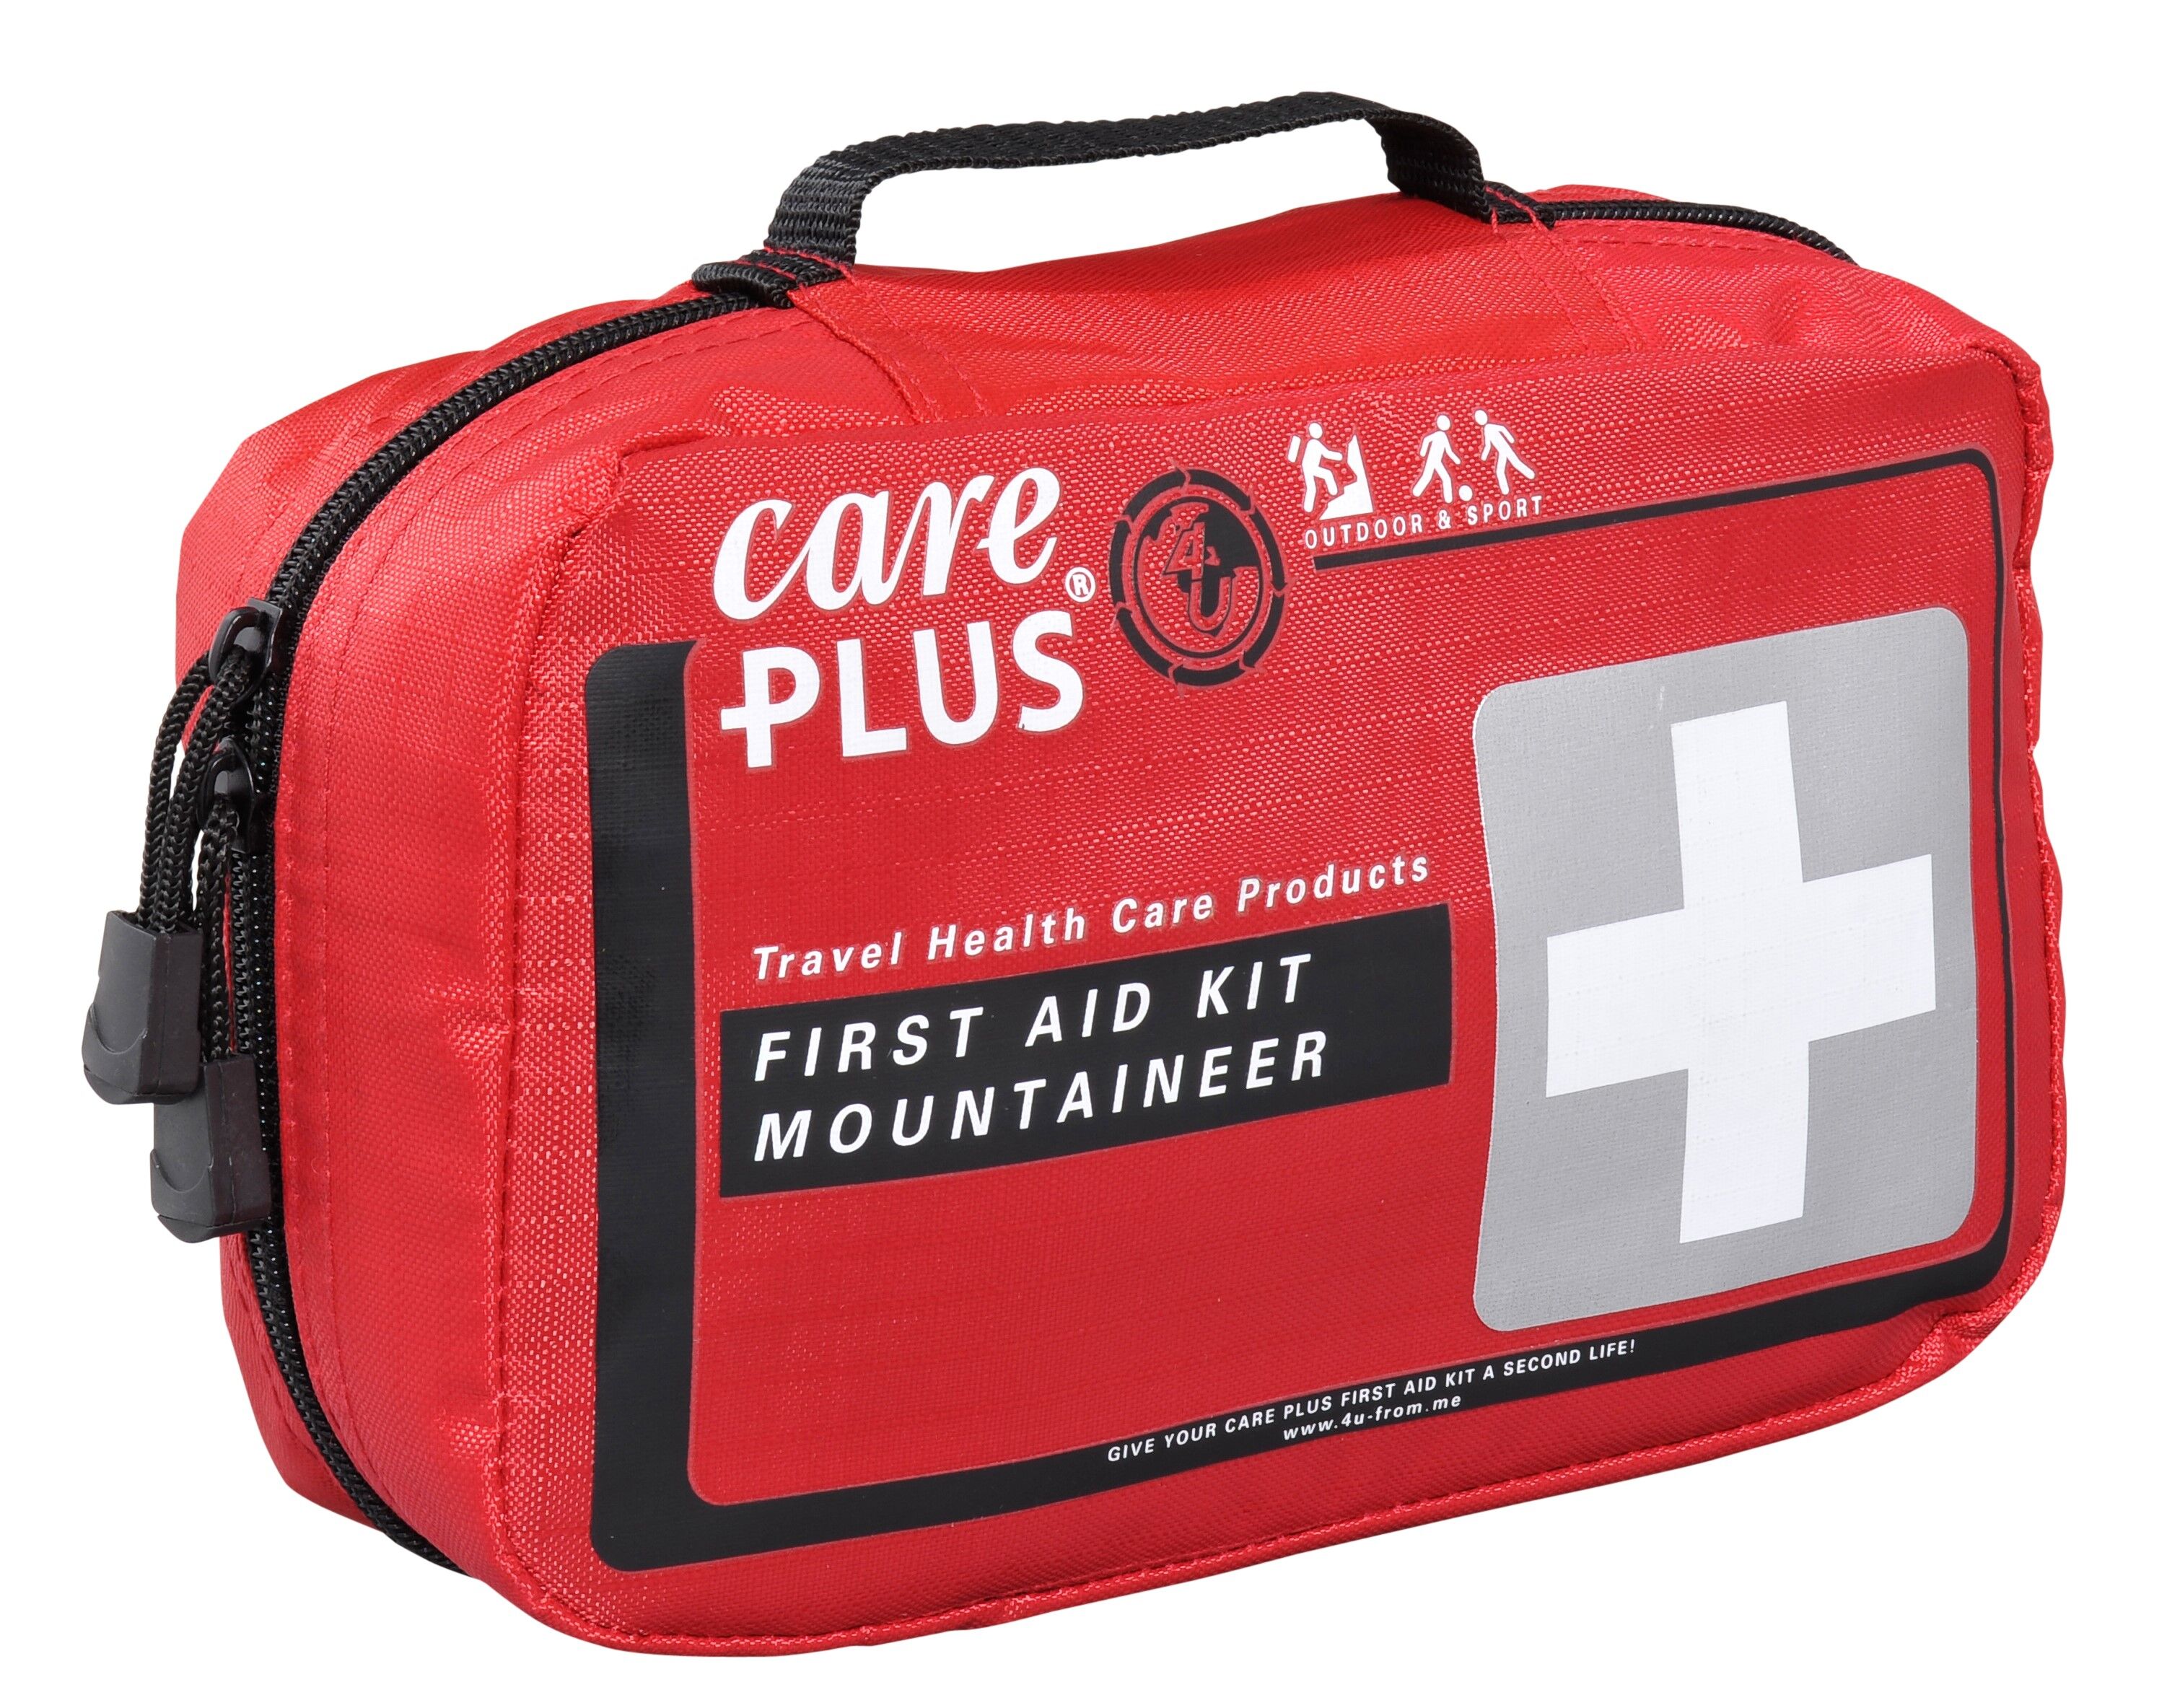 Care Plus First Aid Kit - Mountaineer - First aid kit